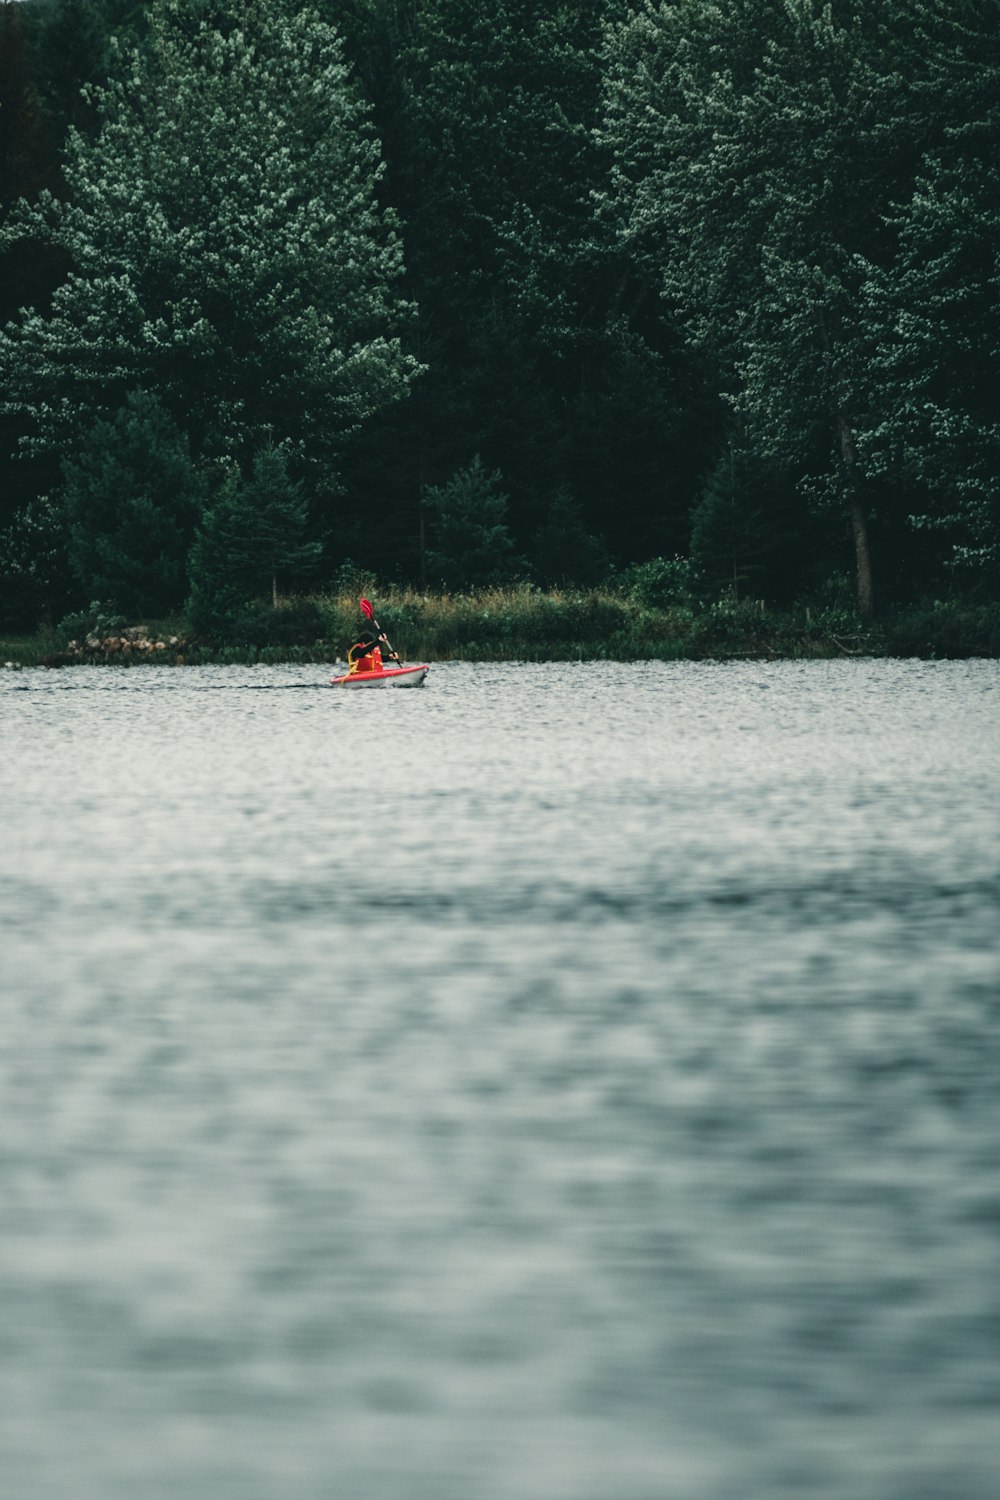 a person in a red boat on a body of water